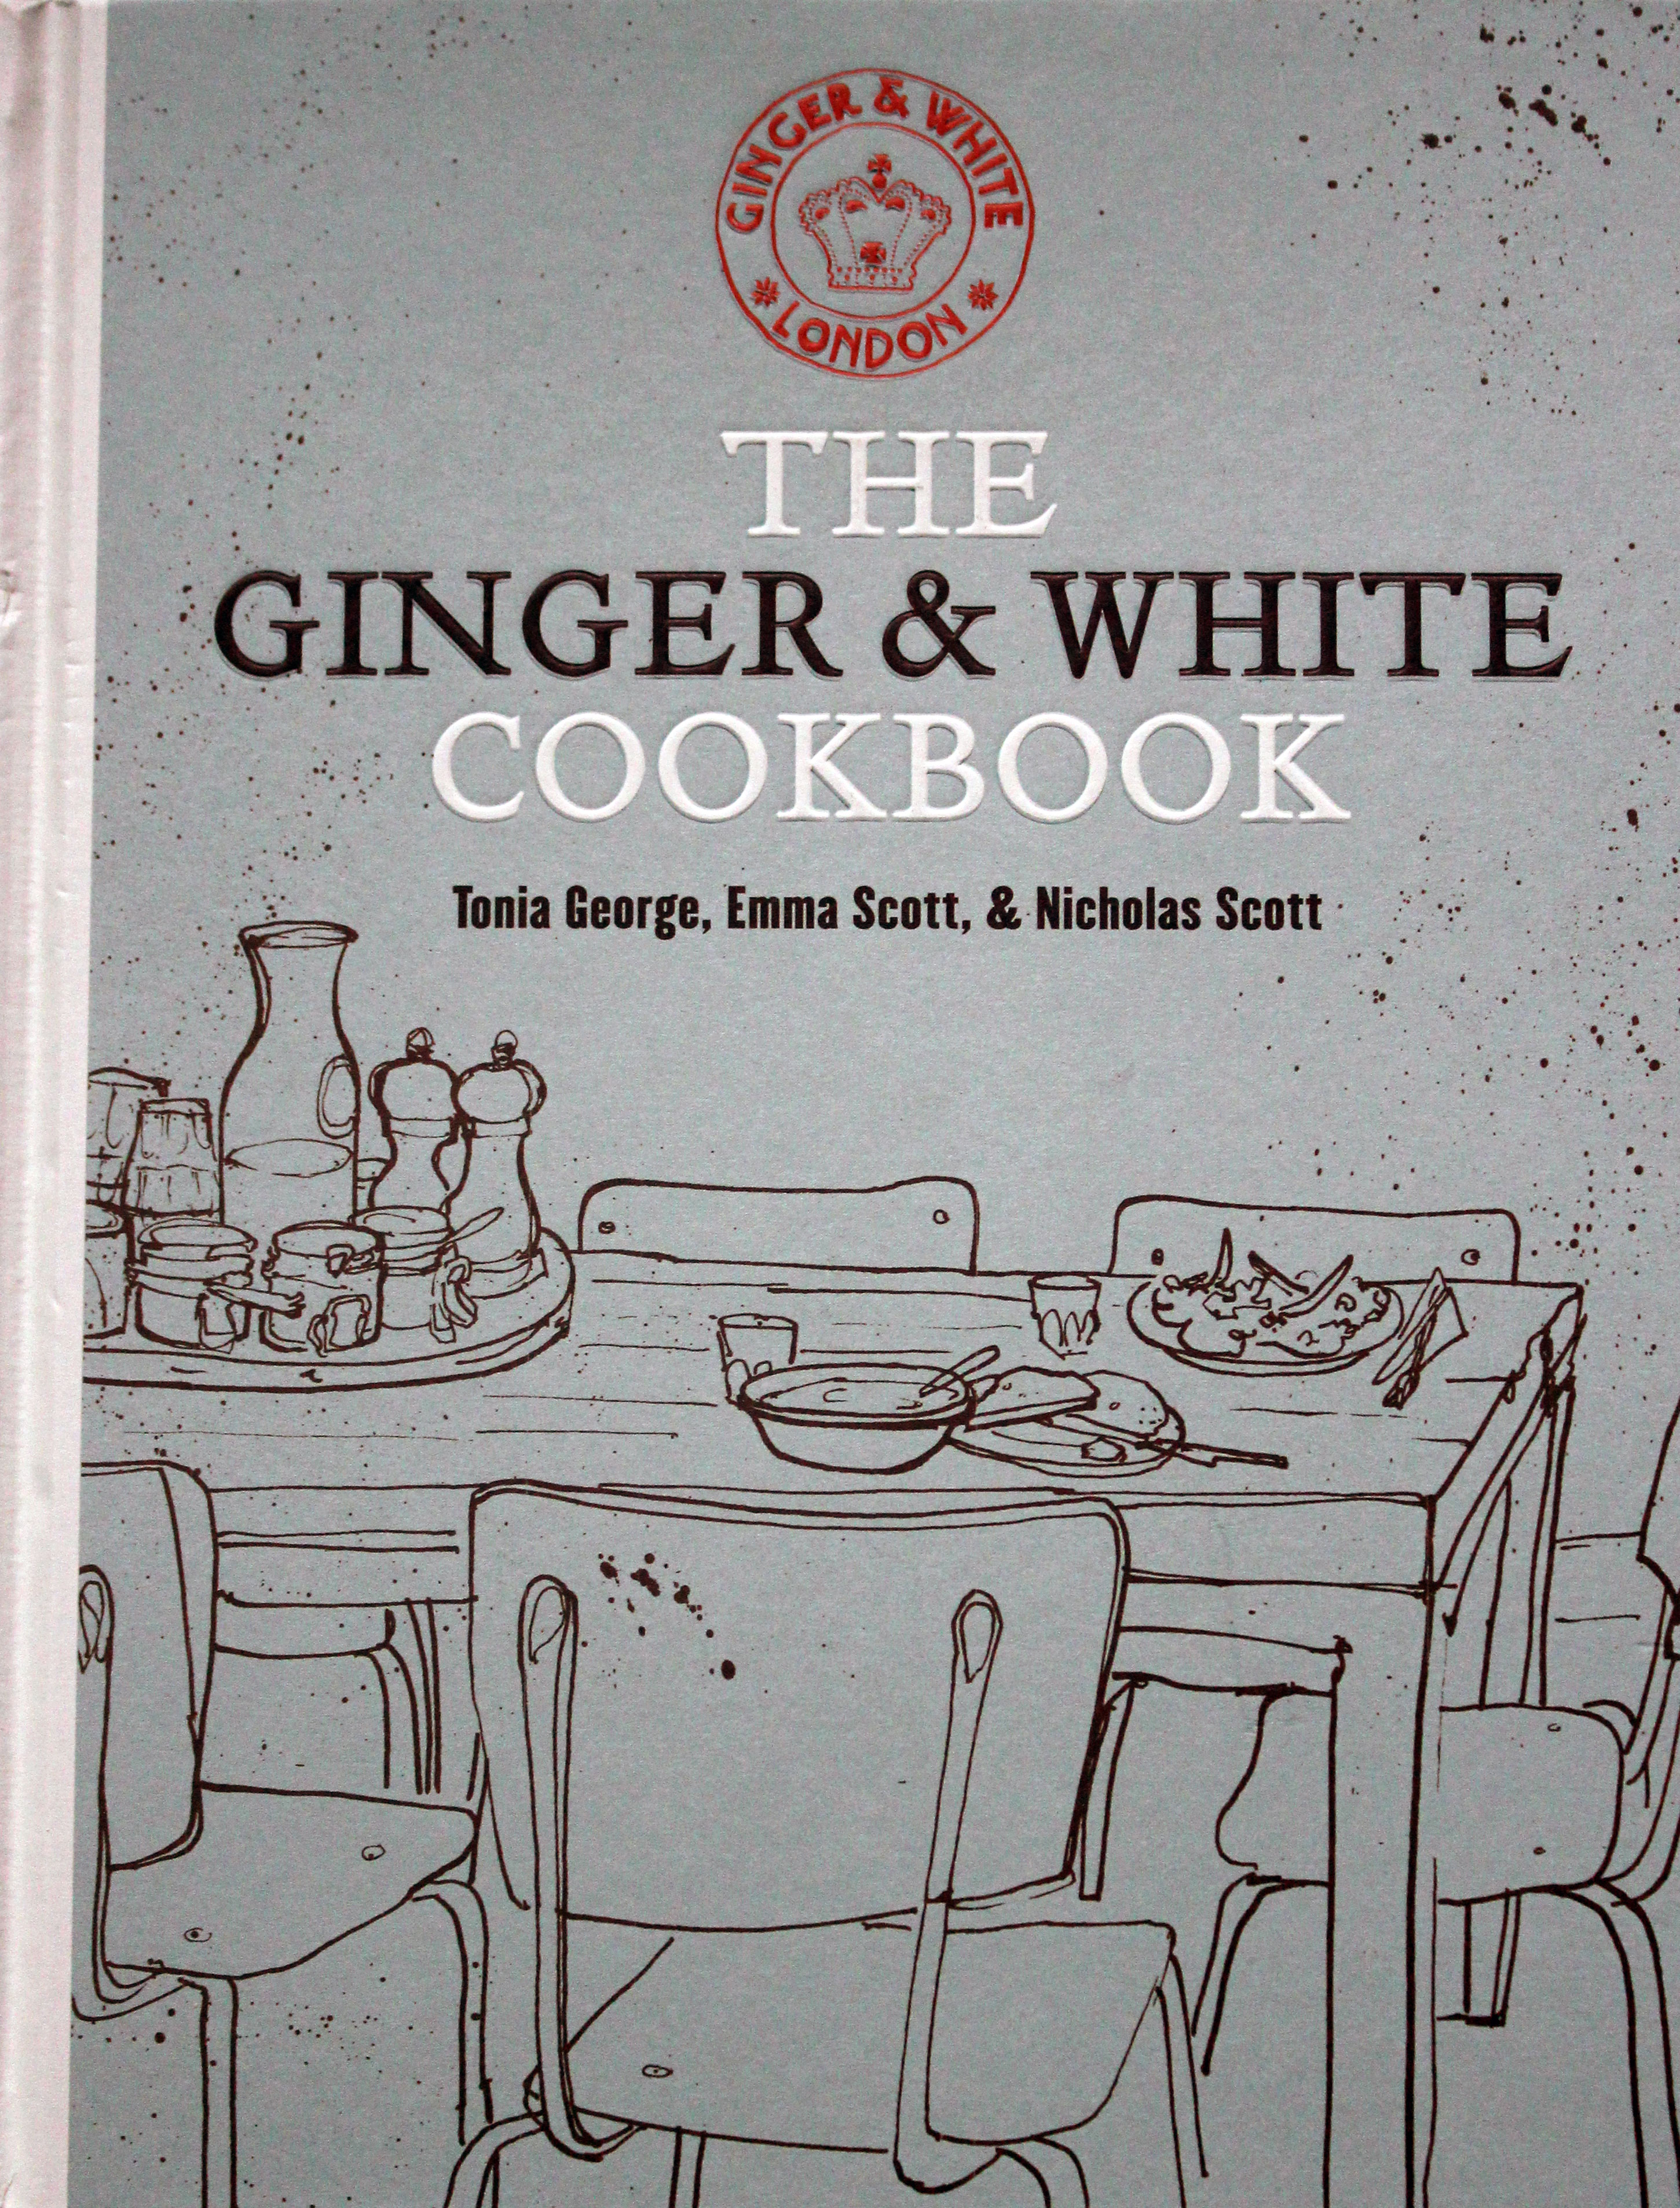 TBT Cookbook Review: The Ginger & White Cookbook